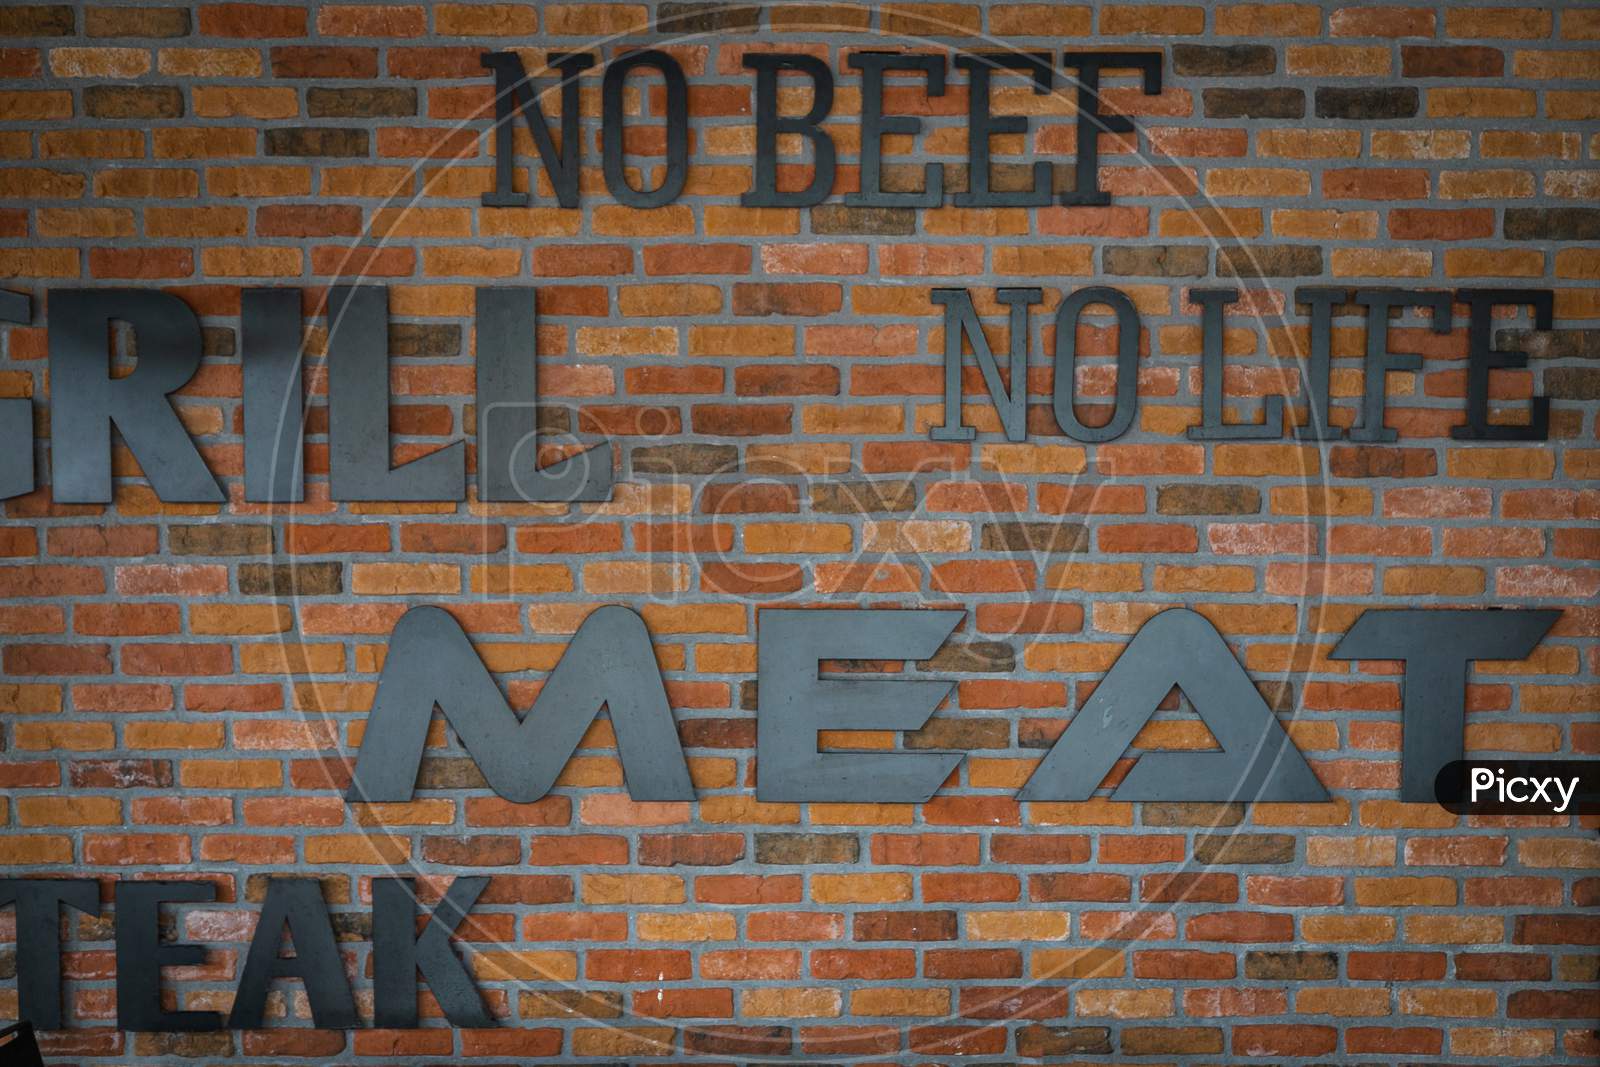 Brick Wall With The Words "No Beef, No Life, Grill, Meat, Steak". The Urge To Eat Meat